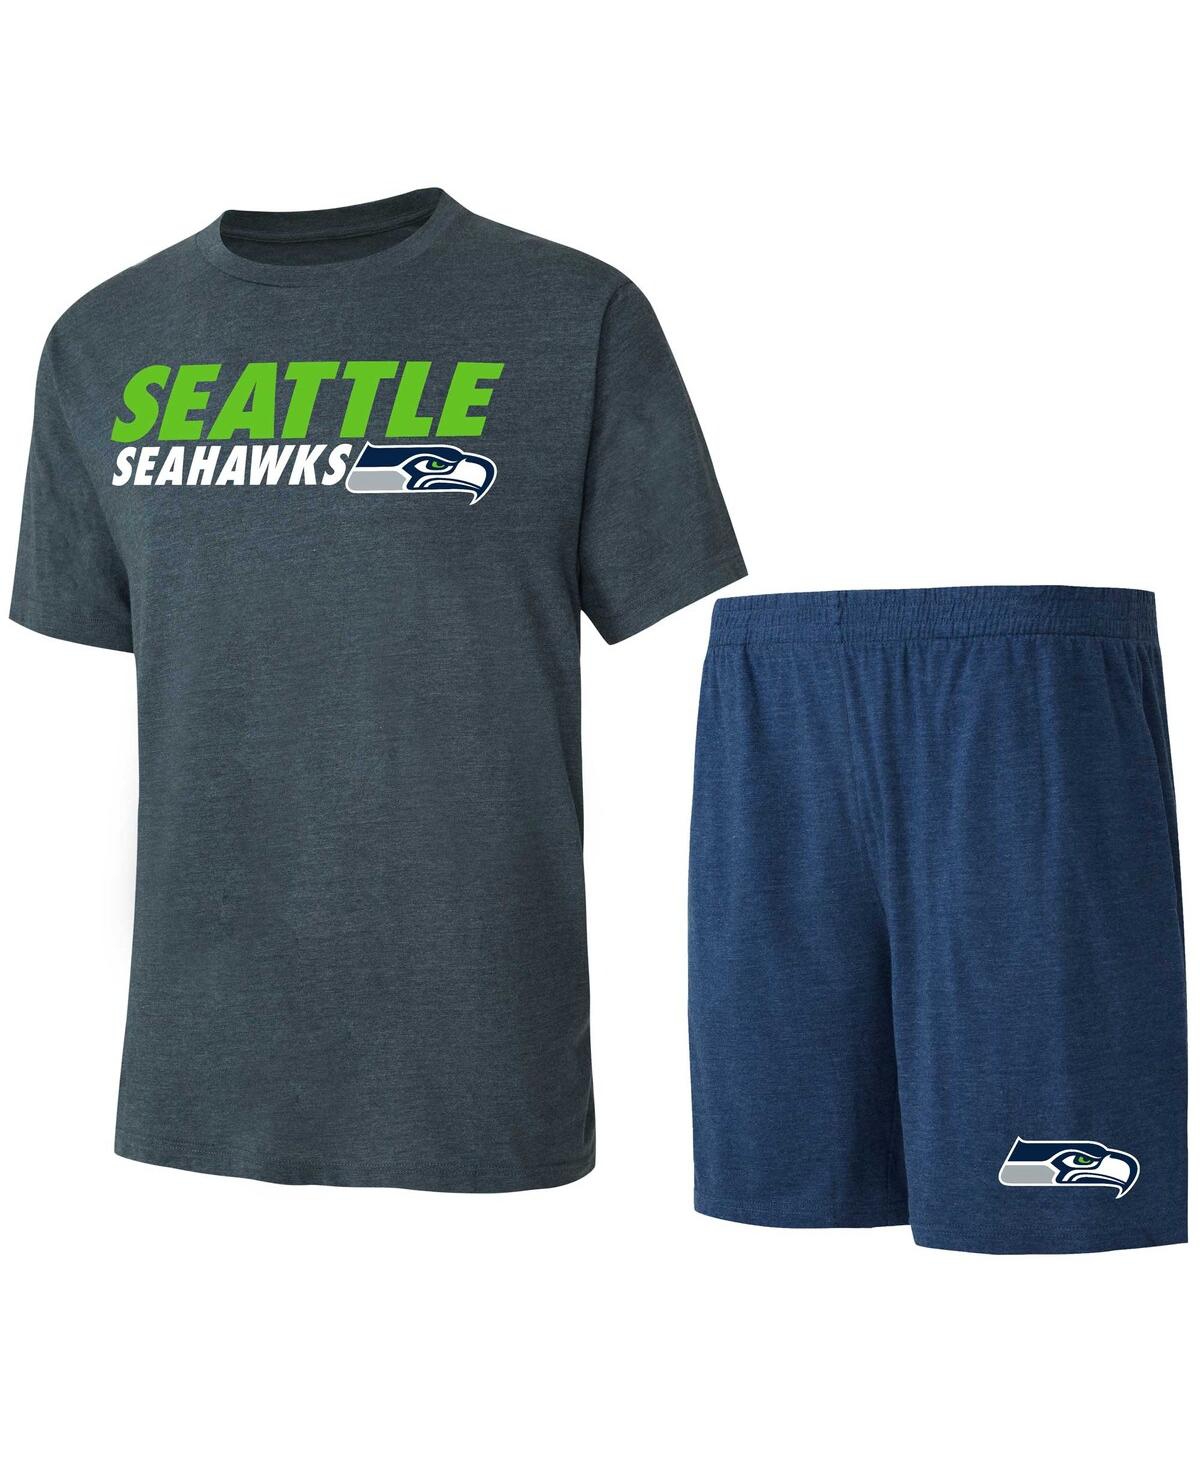 Men's Concepts Sport Navy, Charcoal Seattle Seahawks Meter T-shirt and Shorts Sleep Set - Navy, Charcoal